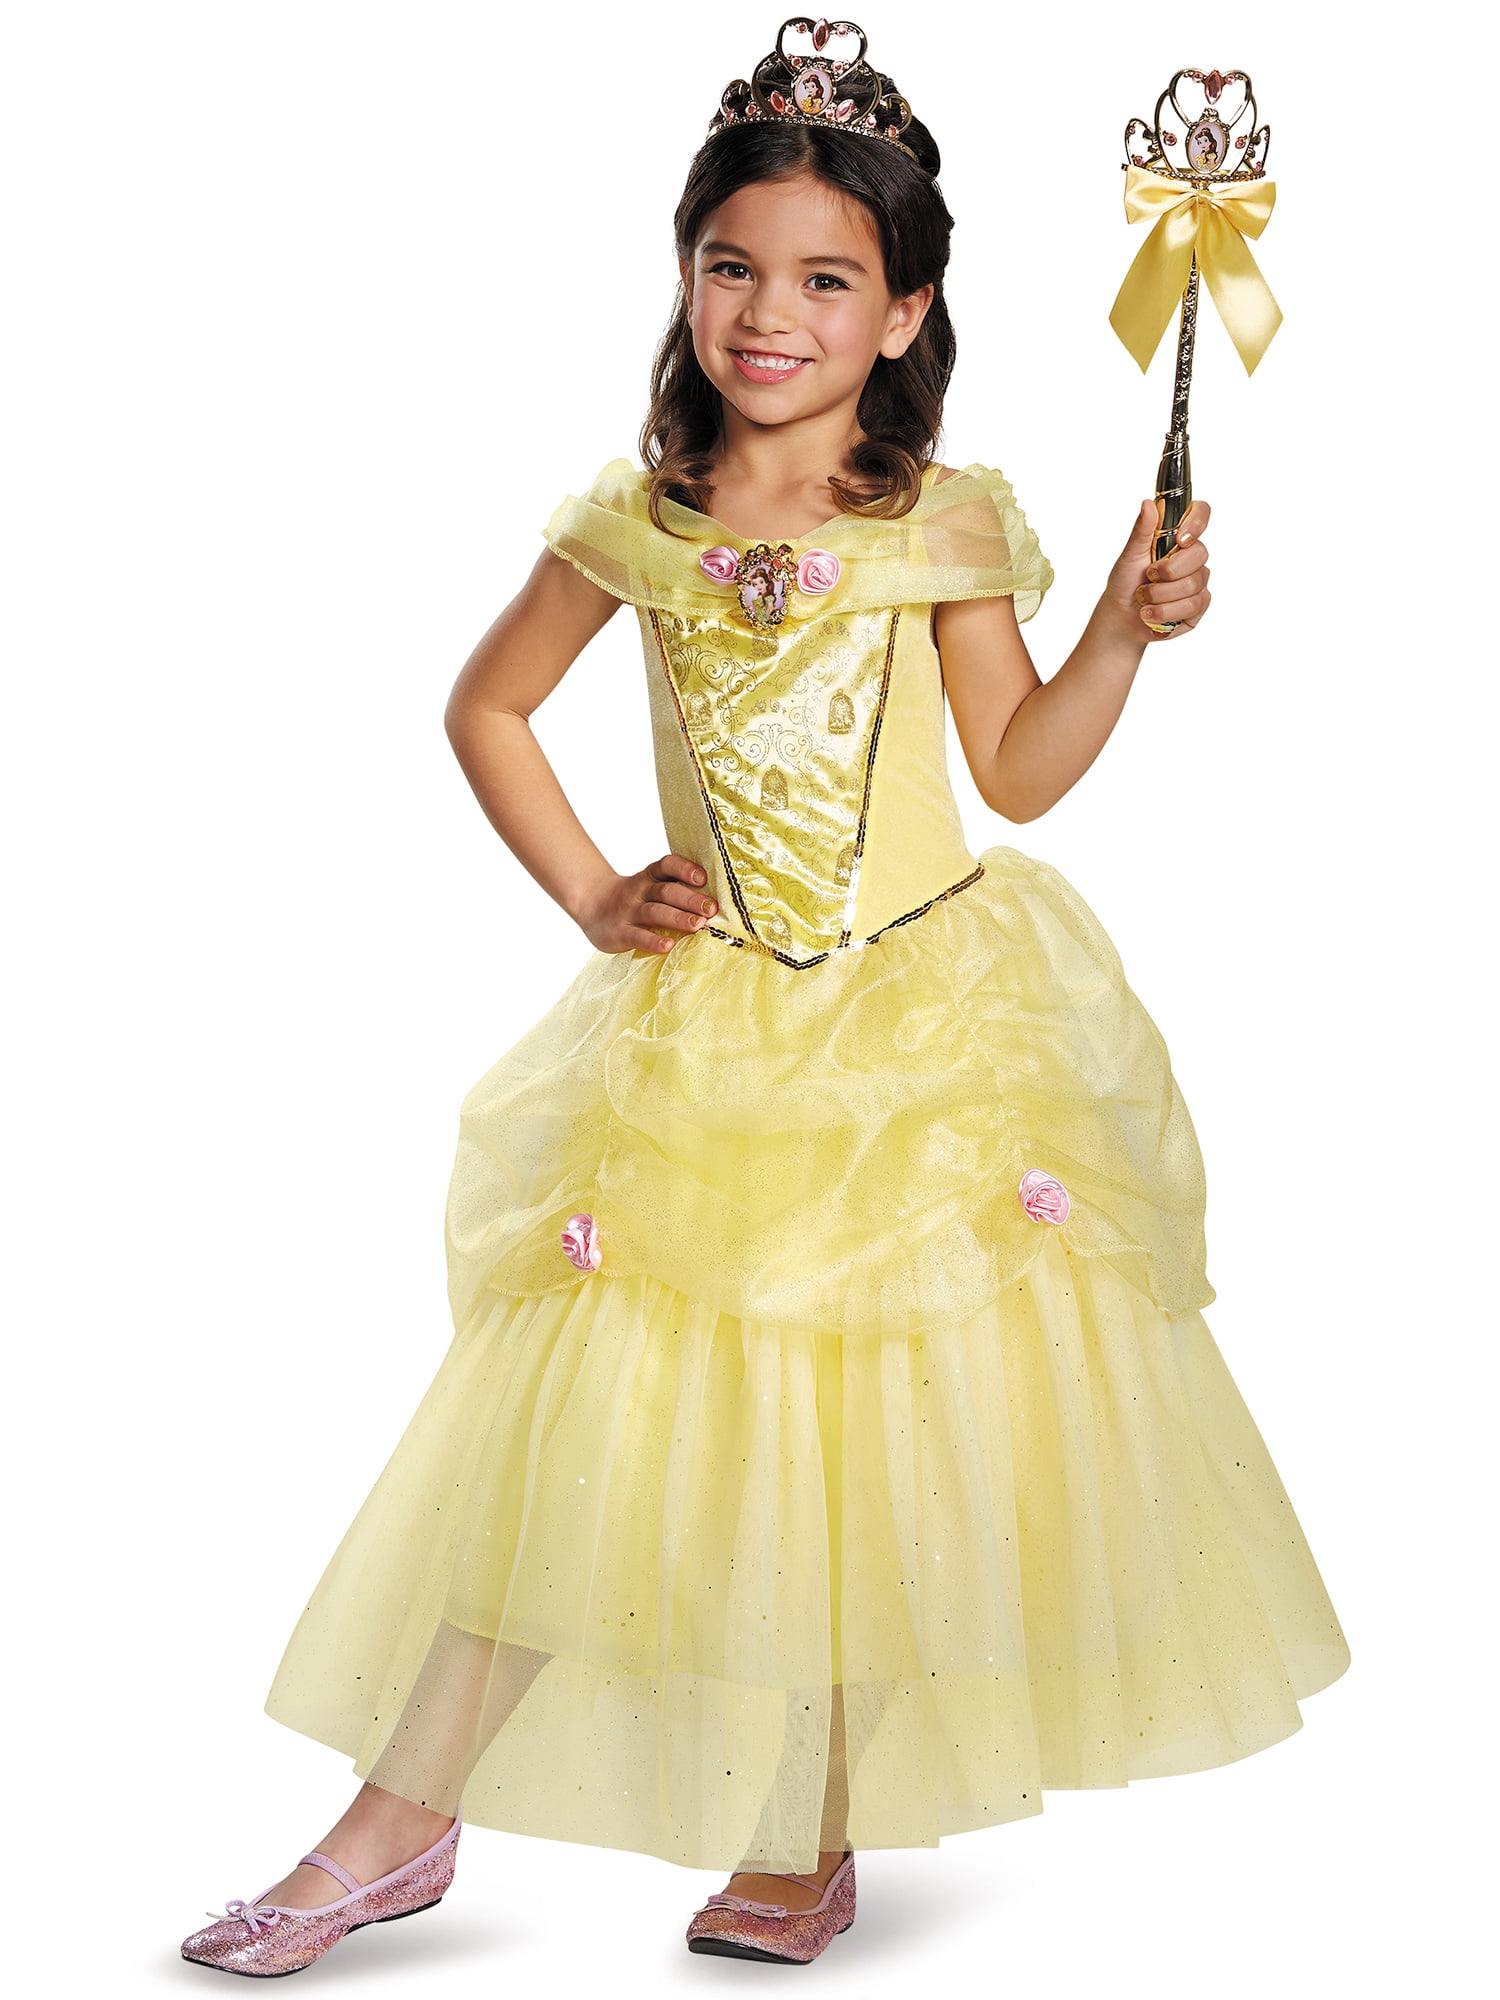 BanKids Princess Dresses Belle Costumes for Toddler Girls Birthday 3T 4T 110CM,E25 